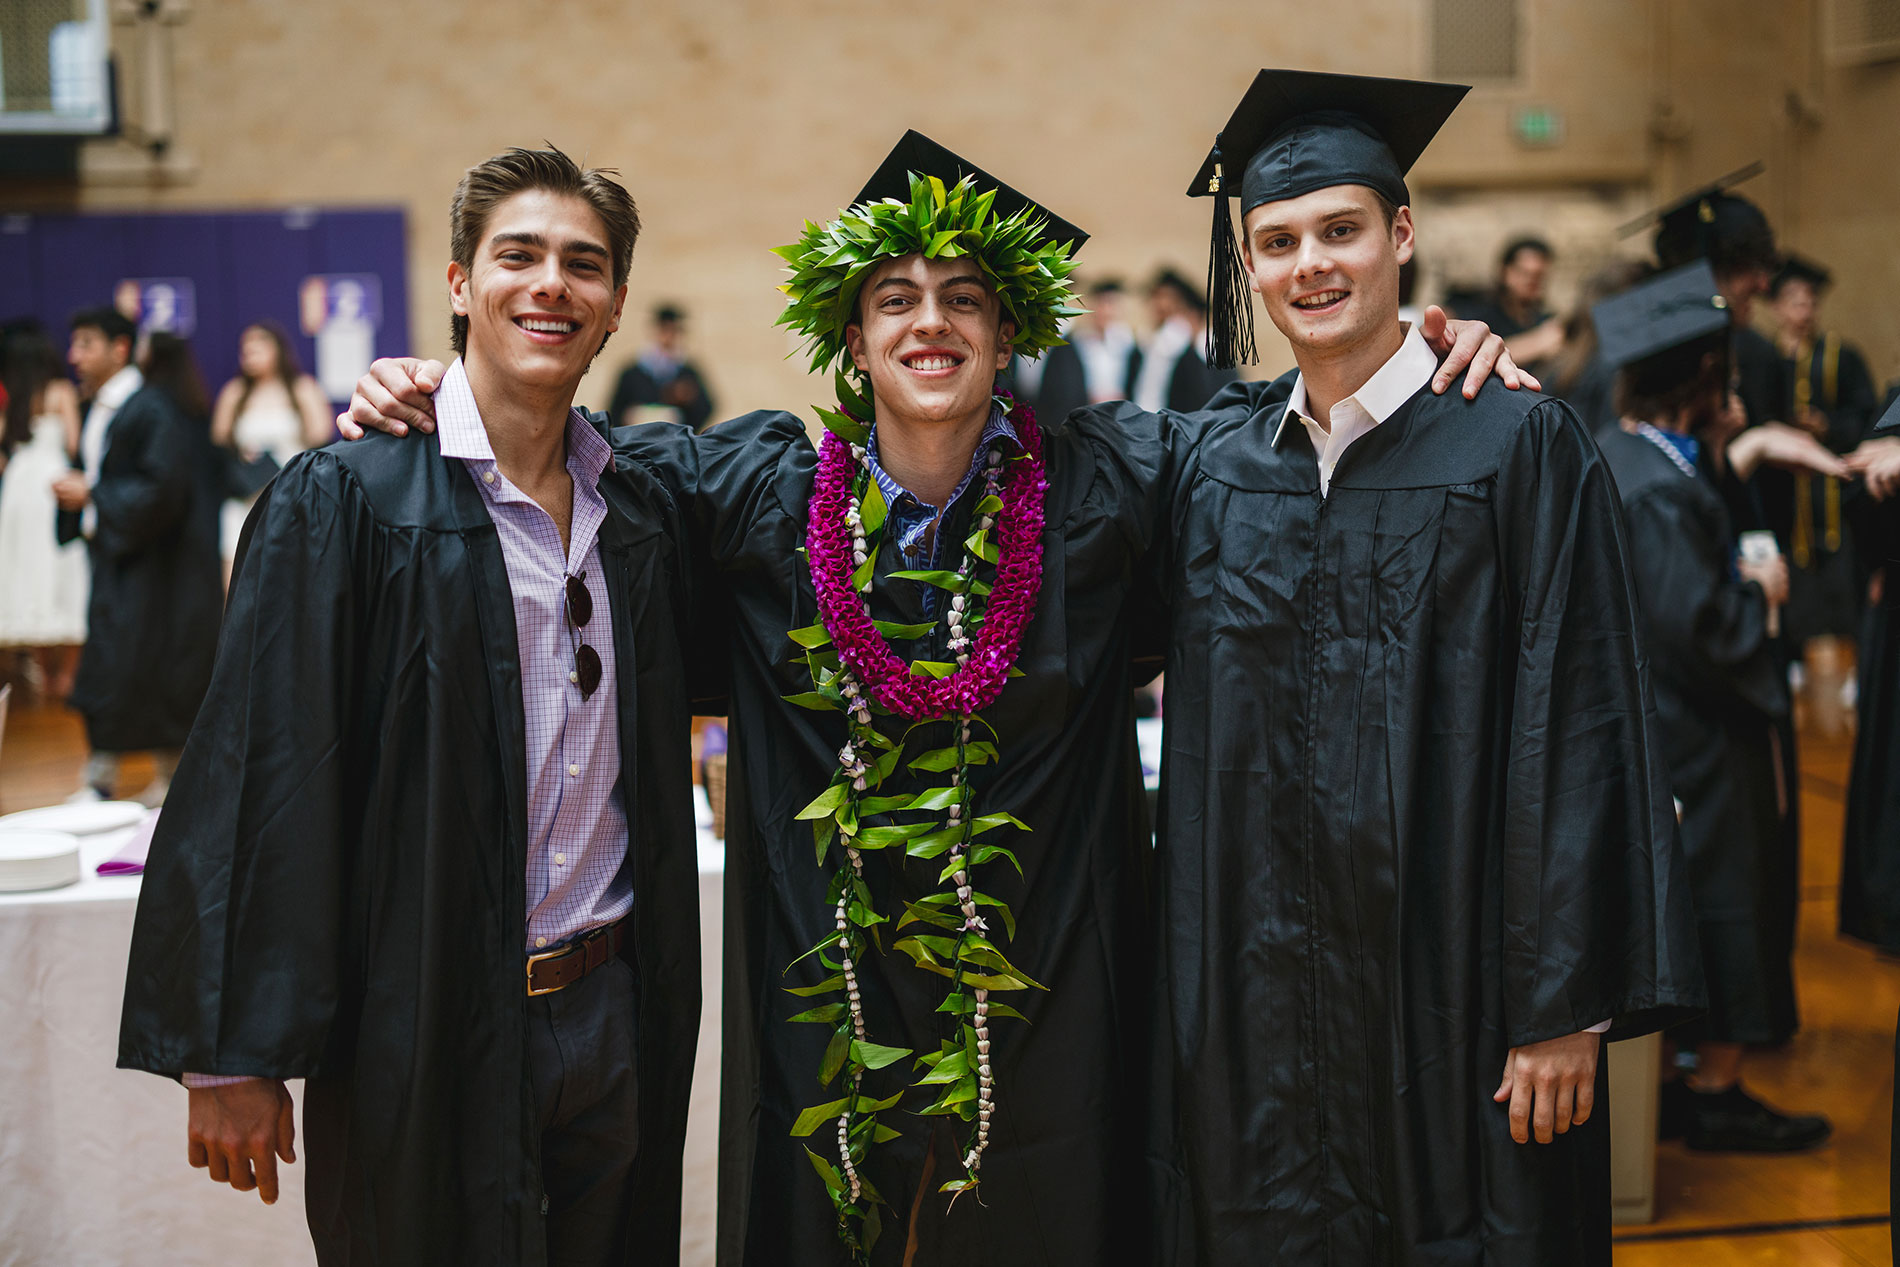 Three young men in graduation gowns and caps, and one with a leafy wreath on his head.